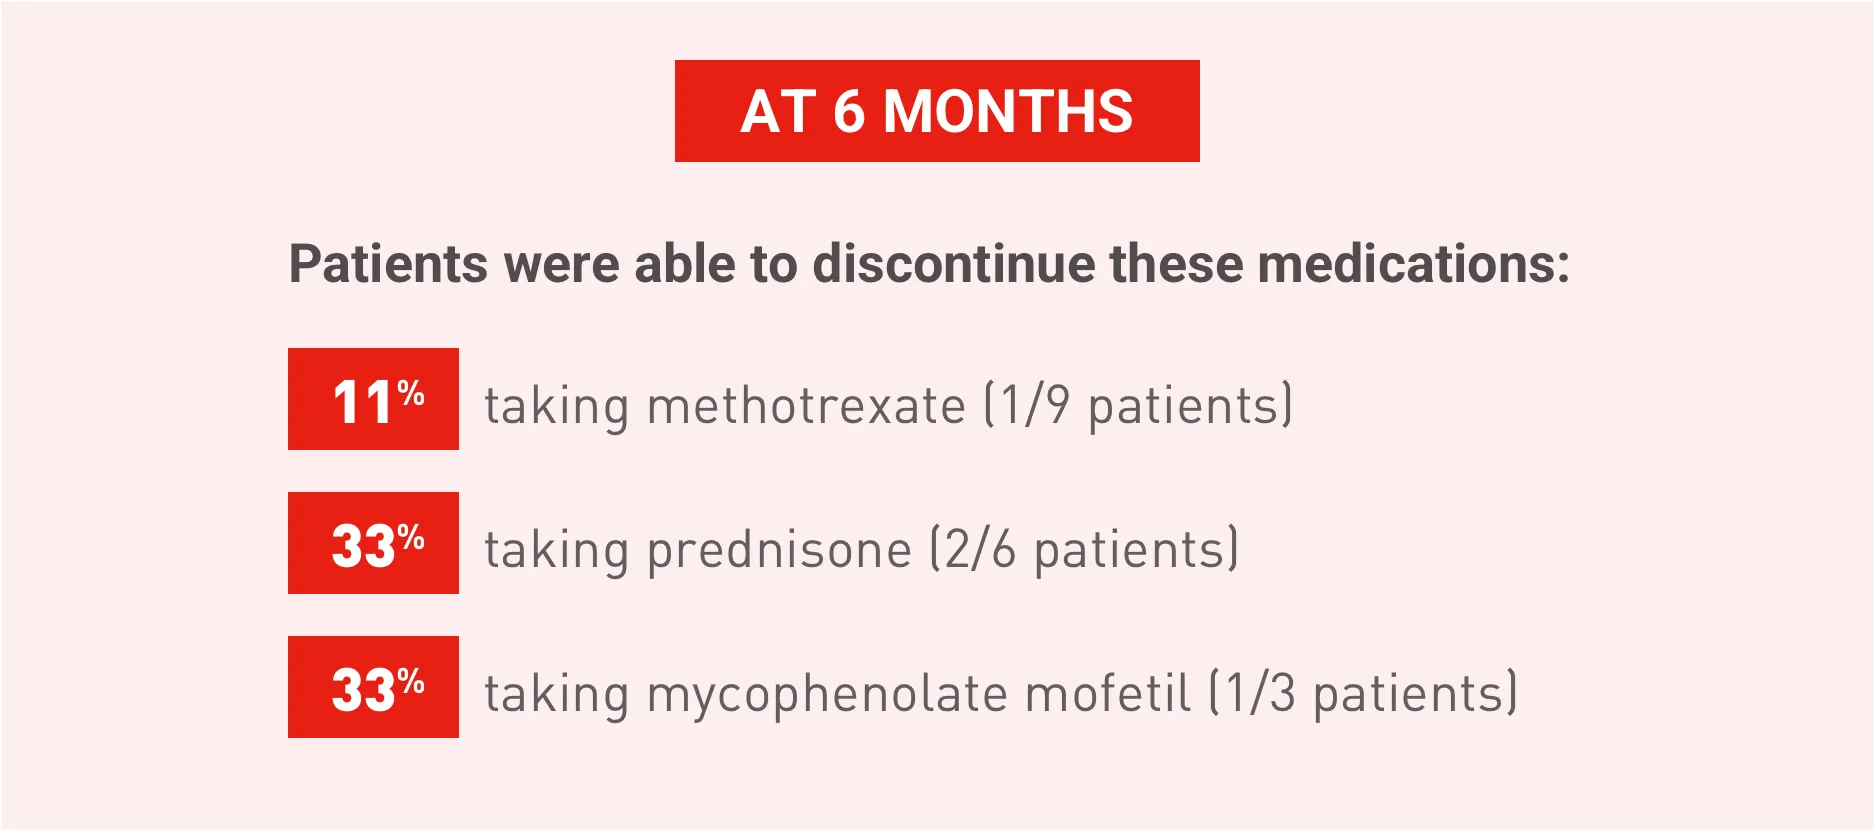 Acthar Gel case study: Medications discontinued at 6 months